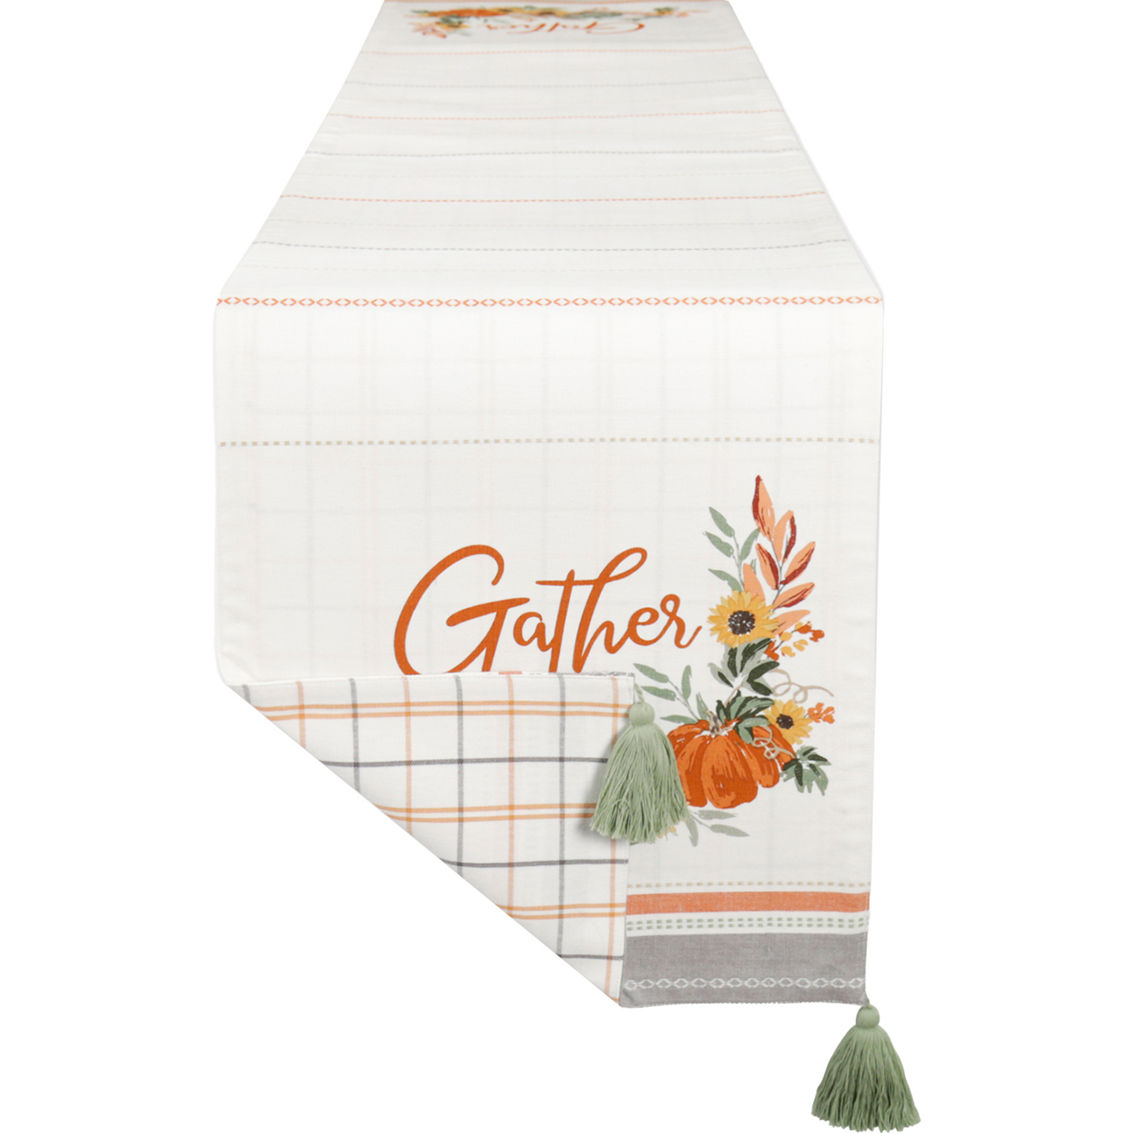 Design Imports 14 x 72 in. Gather Fall Squash Reversible Table Runner - Image 3 of 10